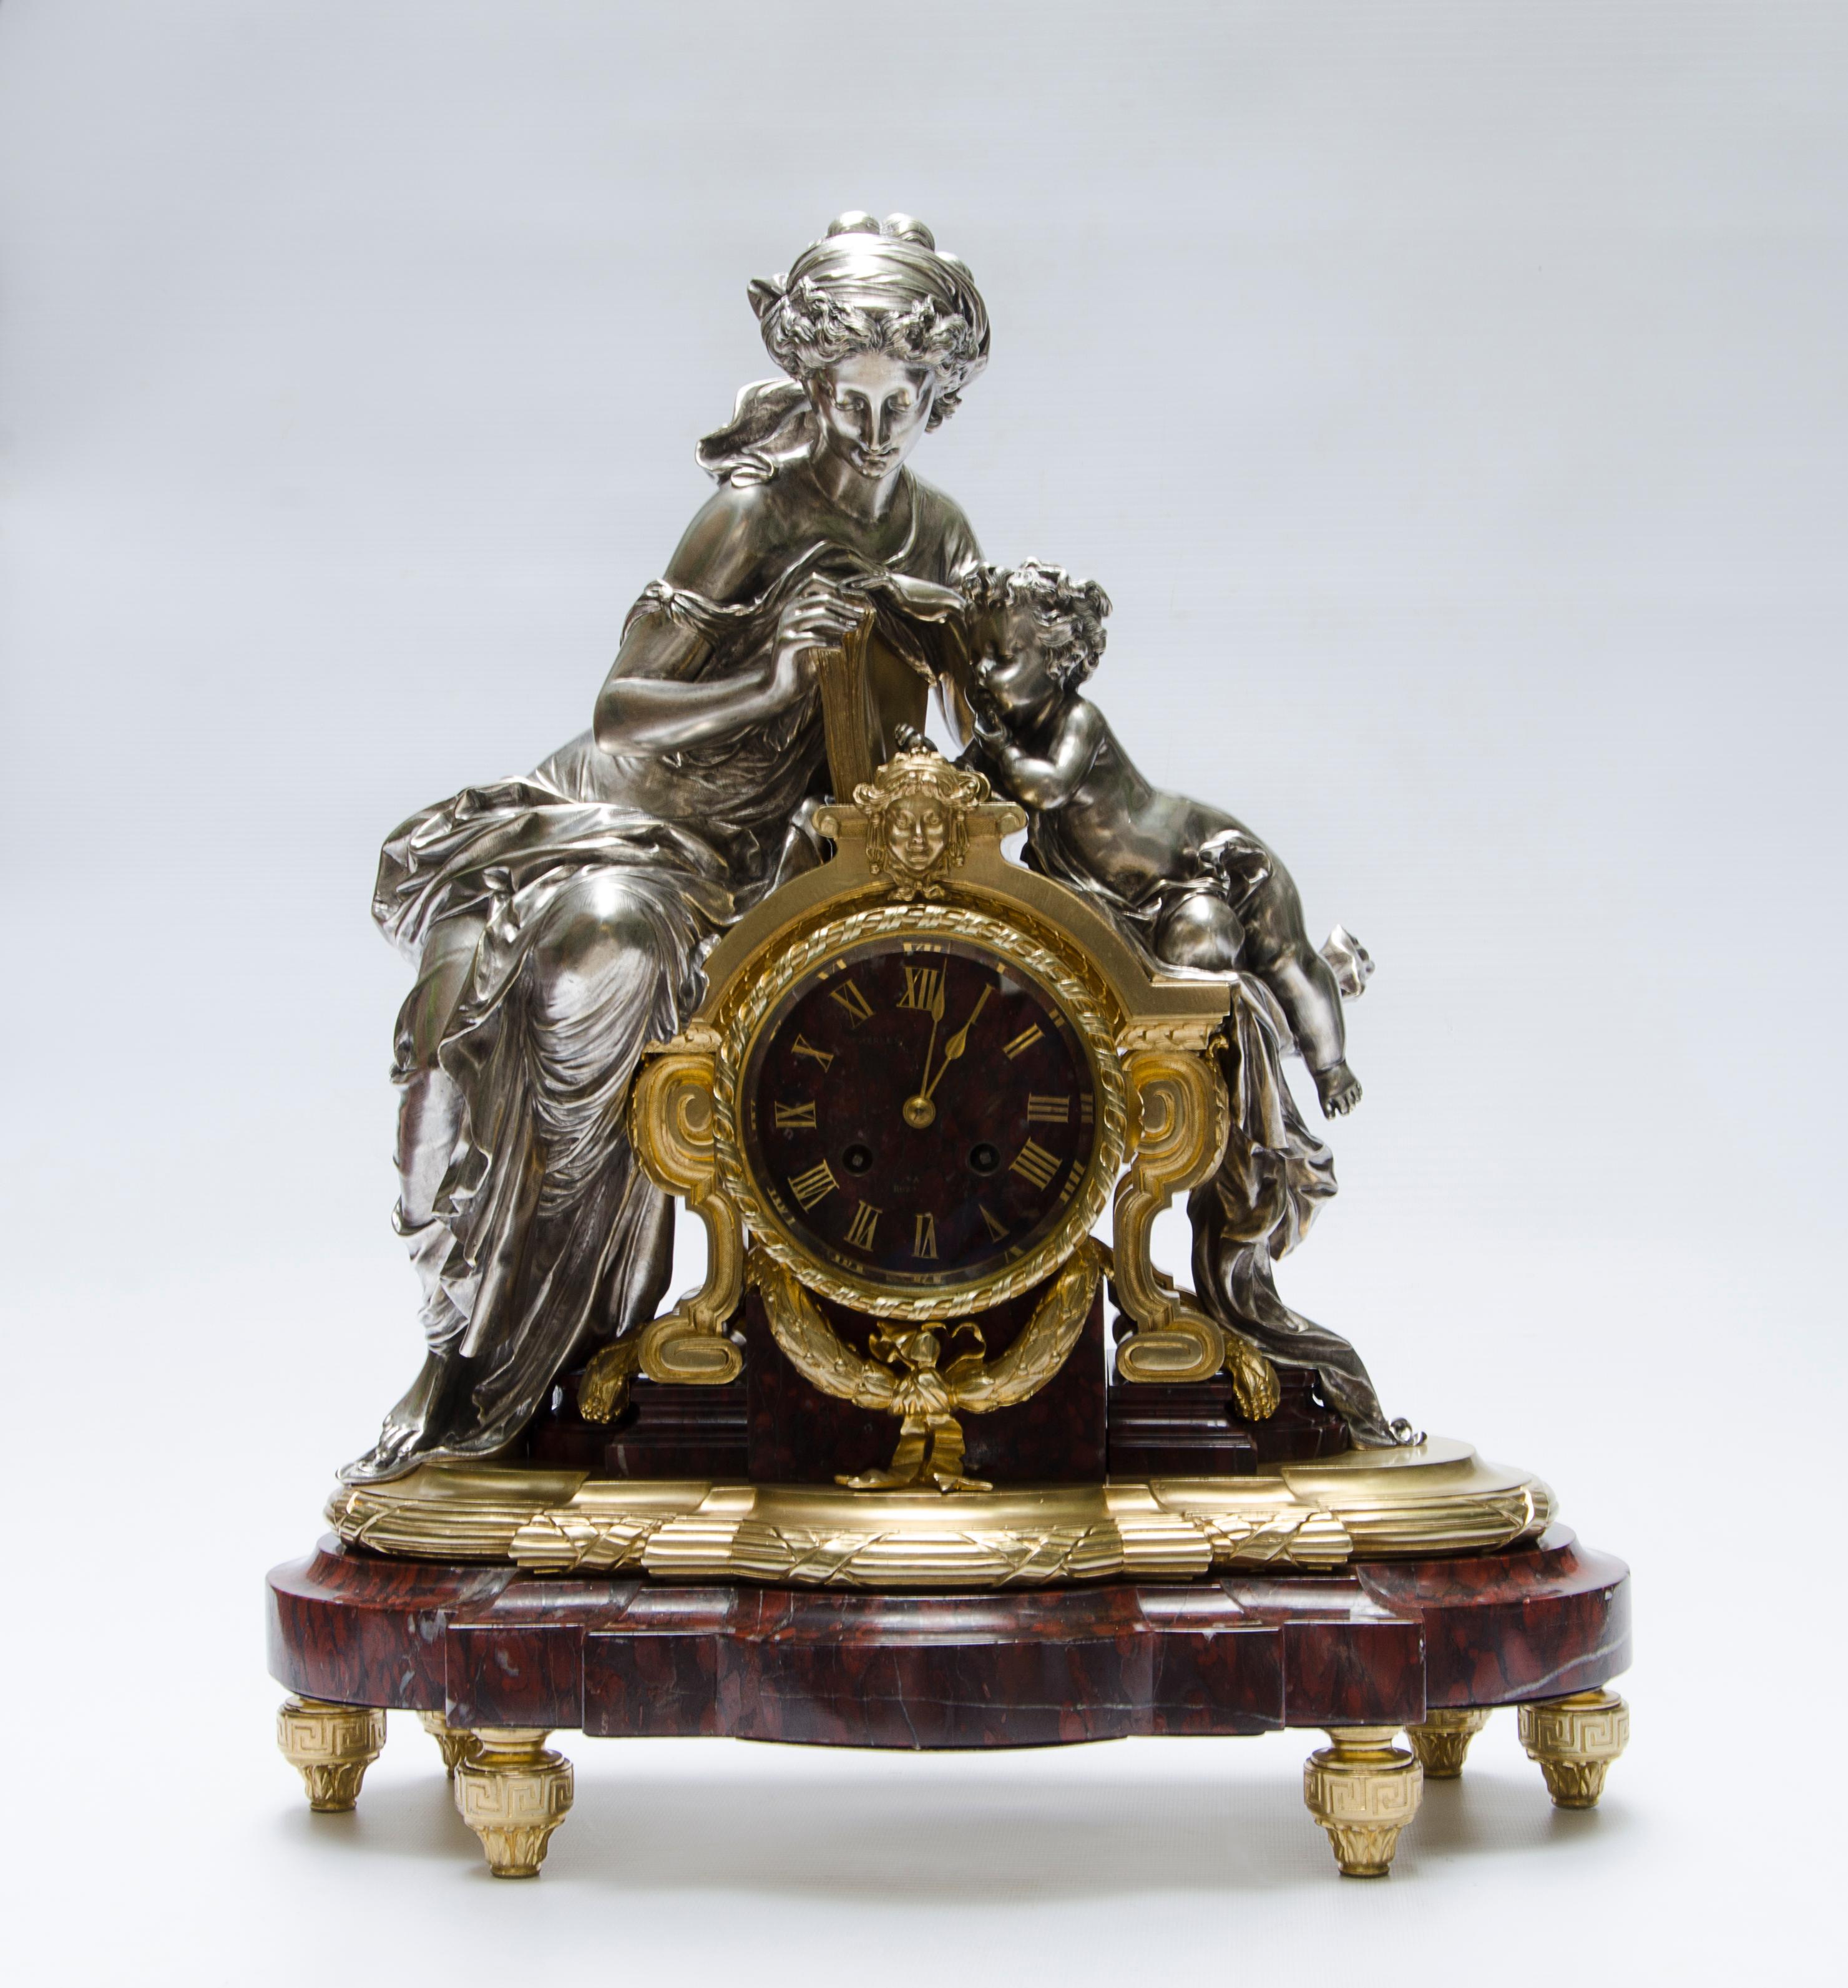 Late 19th century french Louis XVI ormolu gilt bronze mantel clock by Lamerie-Charpentier & Cie.

By: Lemerle-Charpentier & Cie.
Material: bronze, glass, marble, metal, ormolu
Technique: cast, gilt, metalwork, molded, polished
Dimensions: 8 in x 17